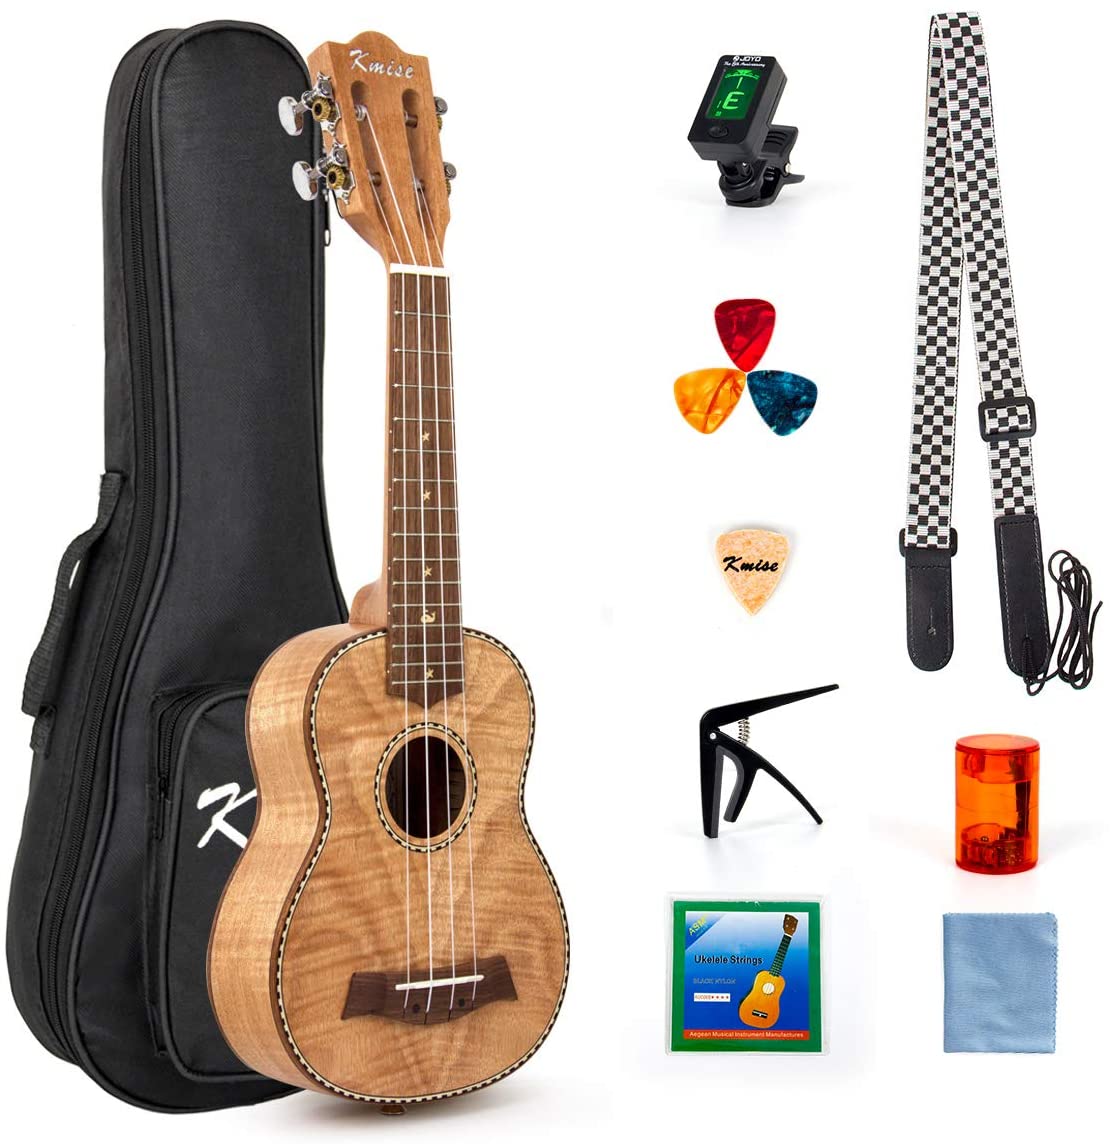 Classical Ukulele Kit Tiger Flame Okoume Wood for Beginner and Professional Player By Kmise - AKLOT